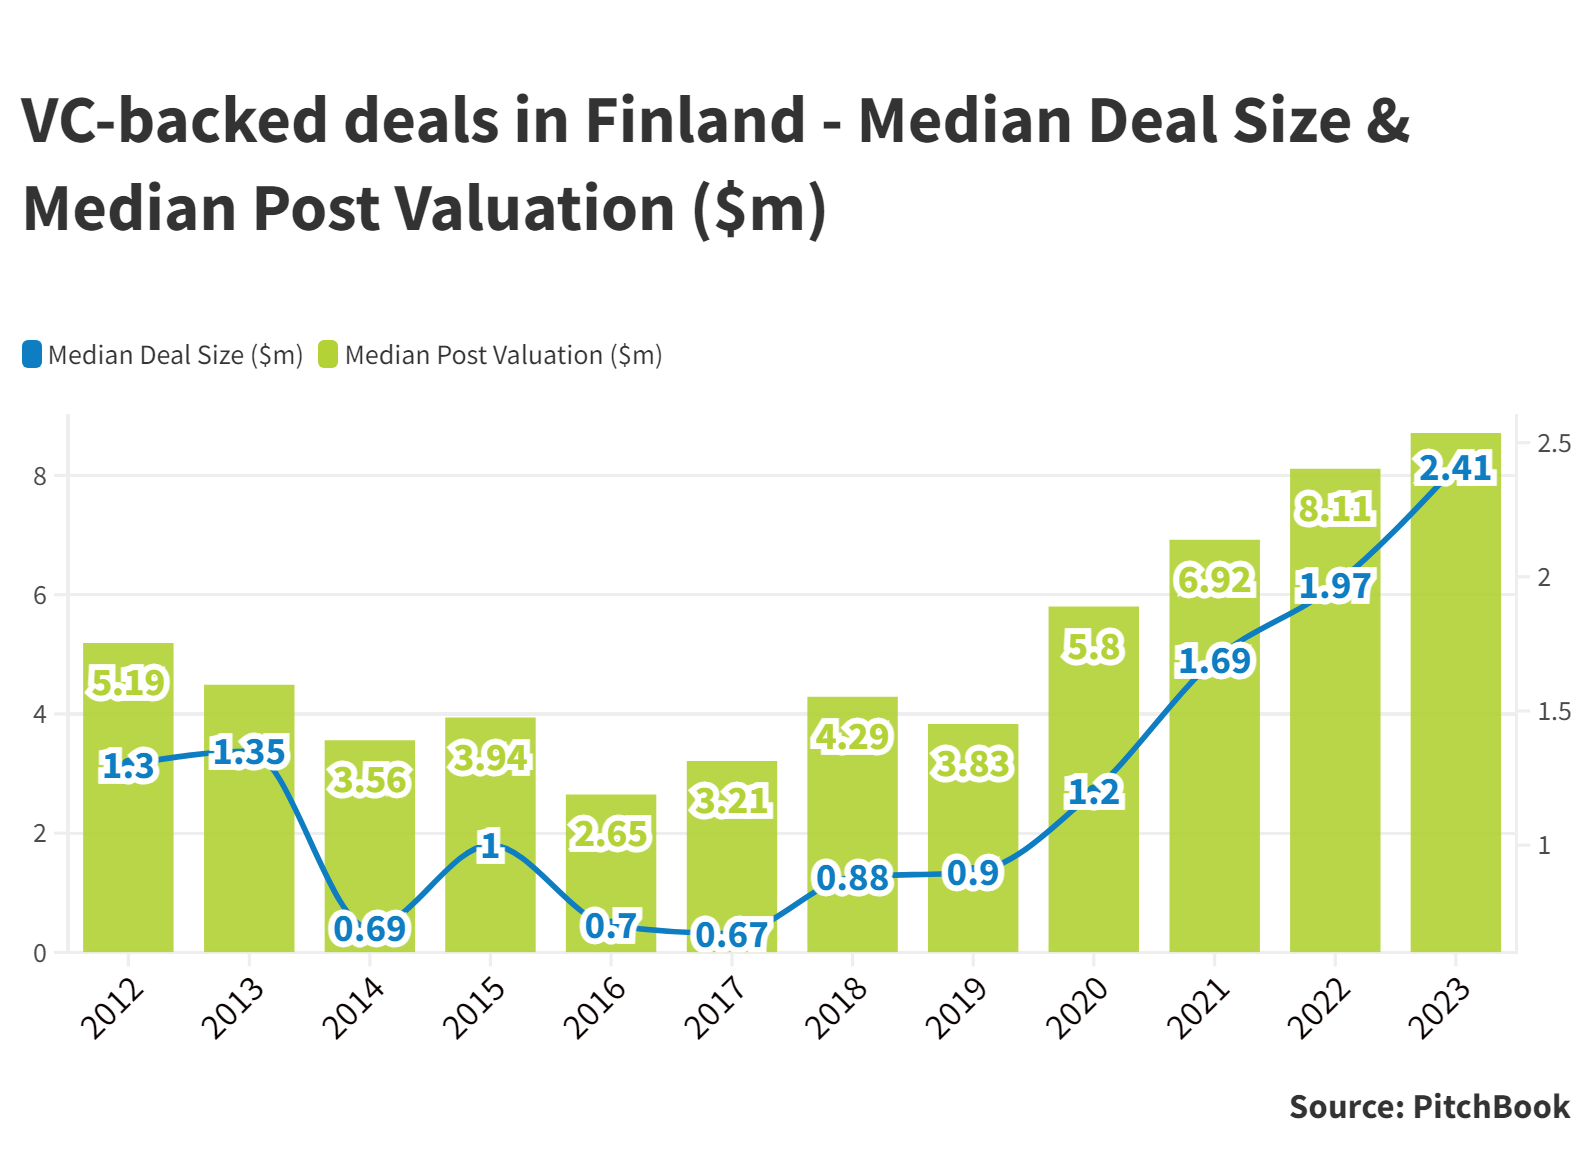 Bar and line chart showing VC-backed deals in Finland 2012-23. by median deal size and median post valuation ($m). Source: PitchBook